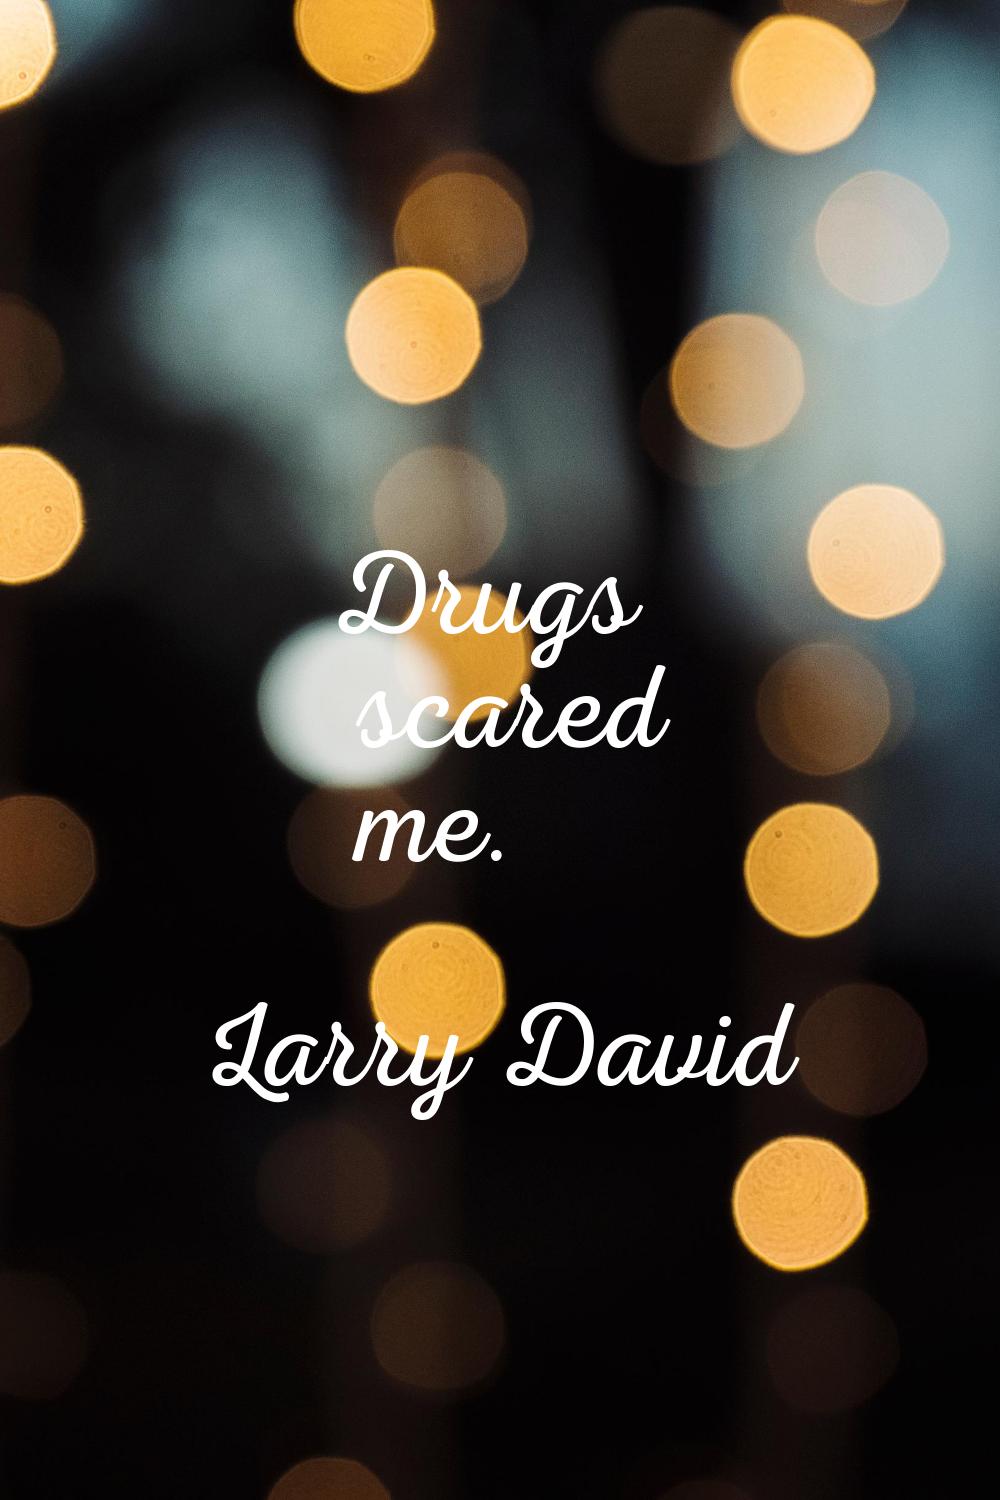 Drugs scared me.